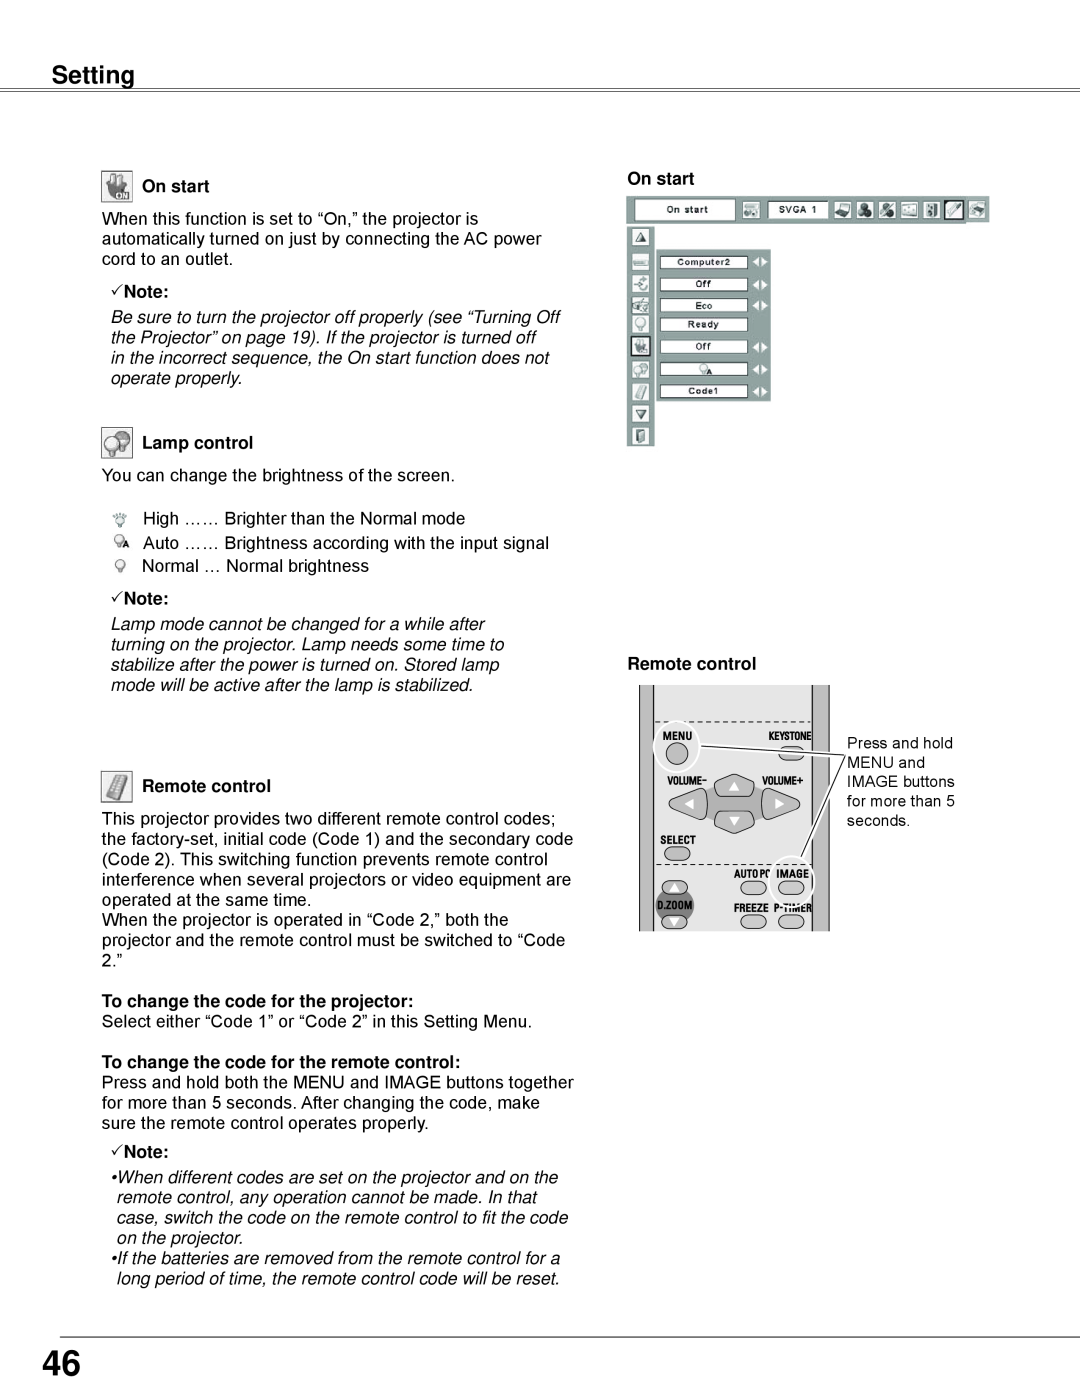 Sanyo PLC-WXE45 owner manual Setting, On start, Note, Lamp control, Remote control, To change the code for the projector 